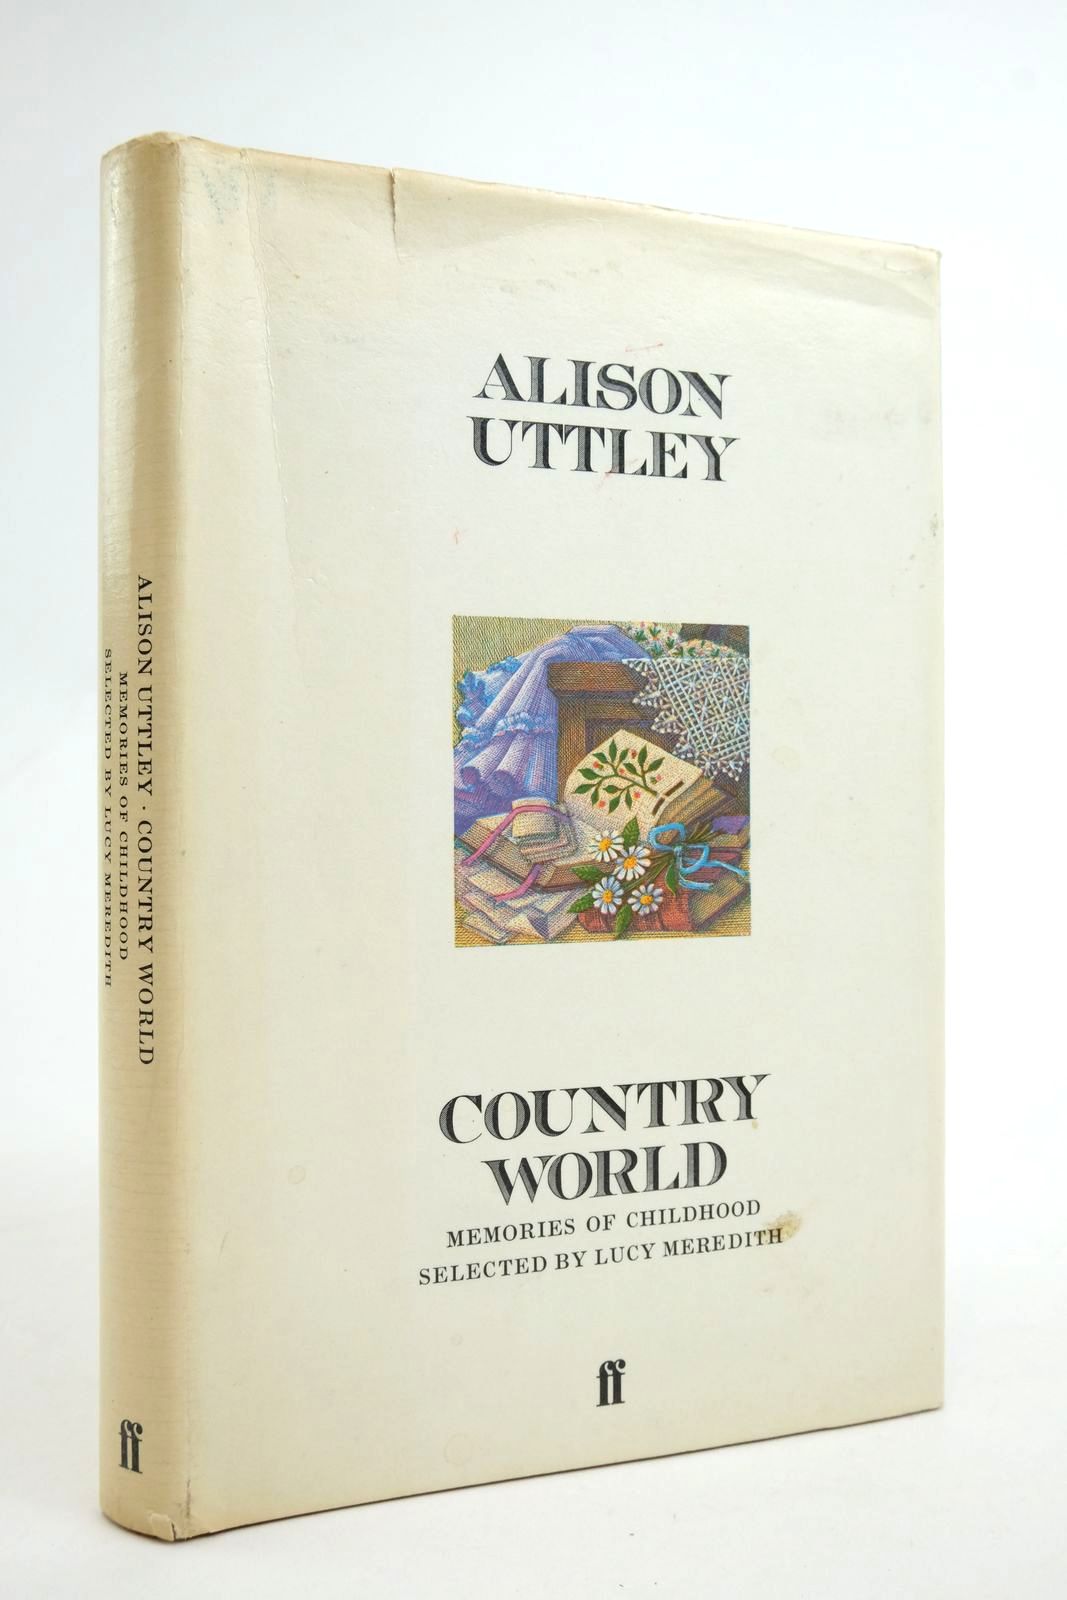 Photo of COUNTRY WORLD MEMORIES OF CHILDHOOD written by Uttley, Alison illustrated by Tunnicliffe, C.F. published by Faber &amp; Faber (STOCK CODE: 2136846)  for sale by Stella & Rose's Books